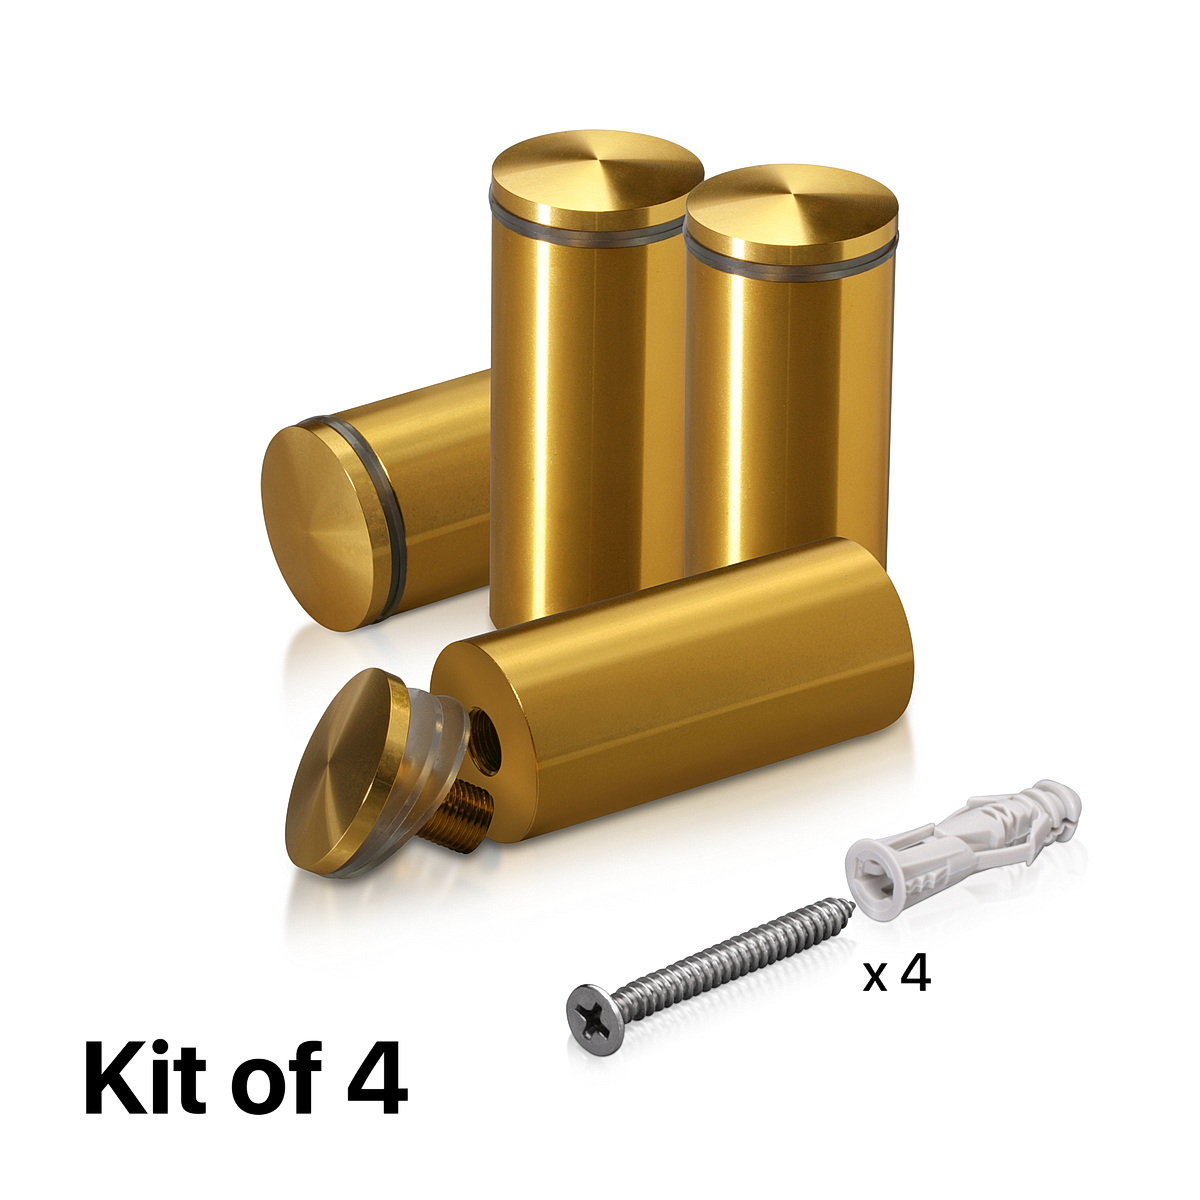 (Set of 4) 1-1/4'' Diameter X 2-1/2'' Barrel Length, Aluminum Rounded Head Standoffs, Gold Anodized Finish Standoff with (4) 2216Z Screws and (4) LANC1 Anchors for concrete or drywall (For Inside / Outside use) [Required Material Hole Size: 7/16'']